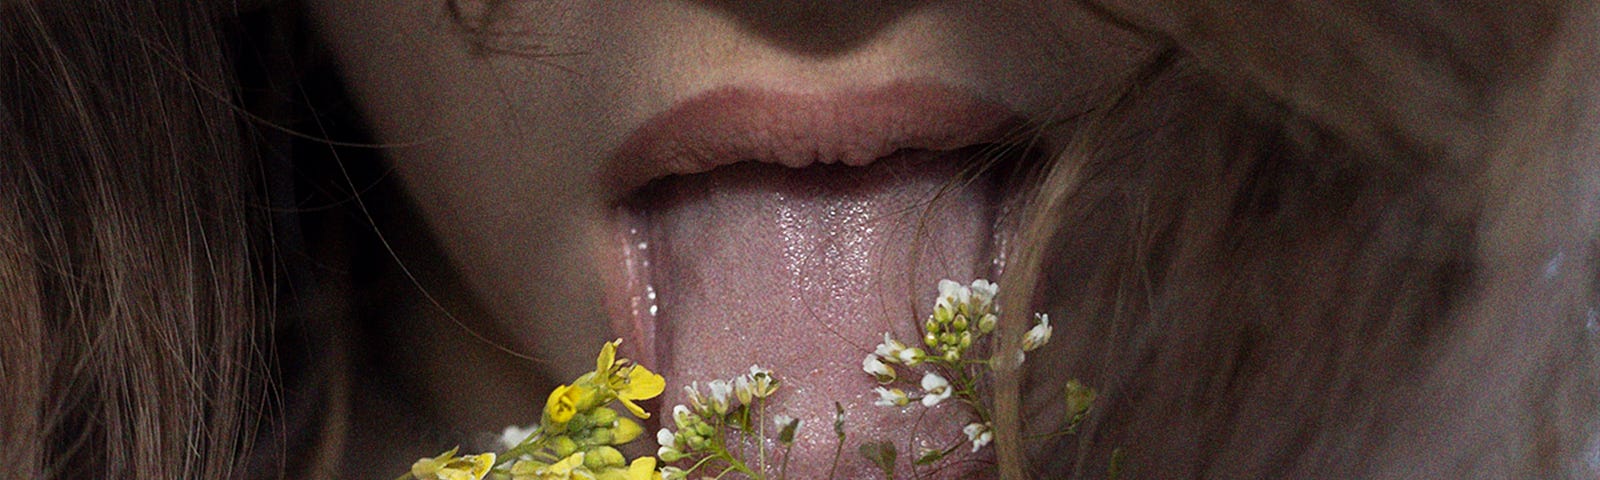 A woman, with her face partially hidden by her hair, is licking some flowers